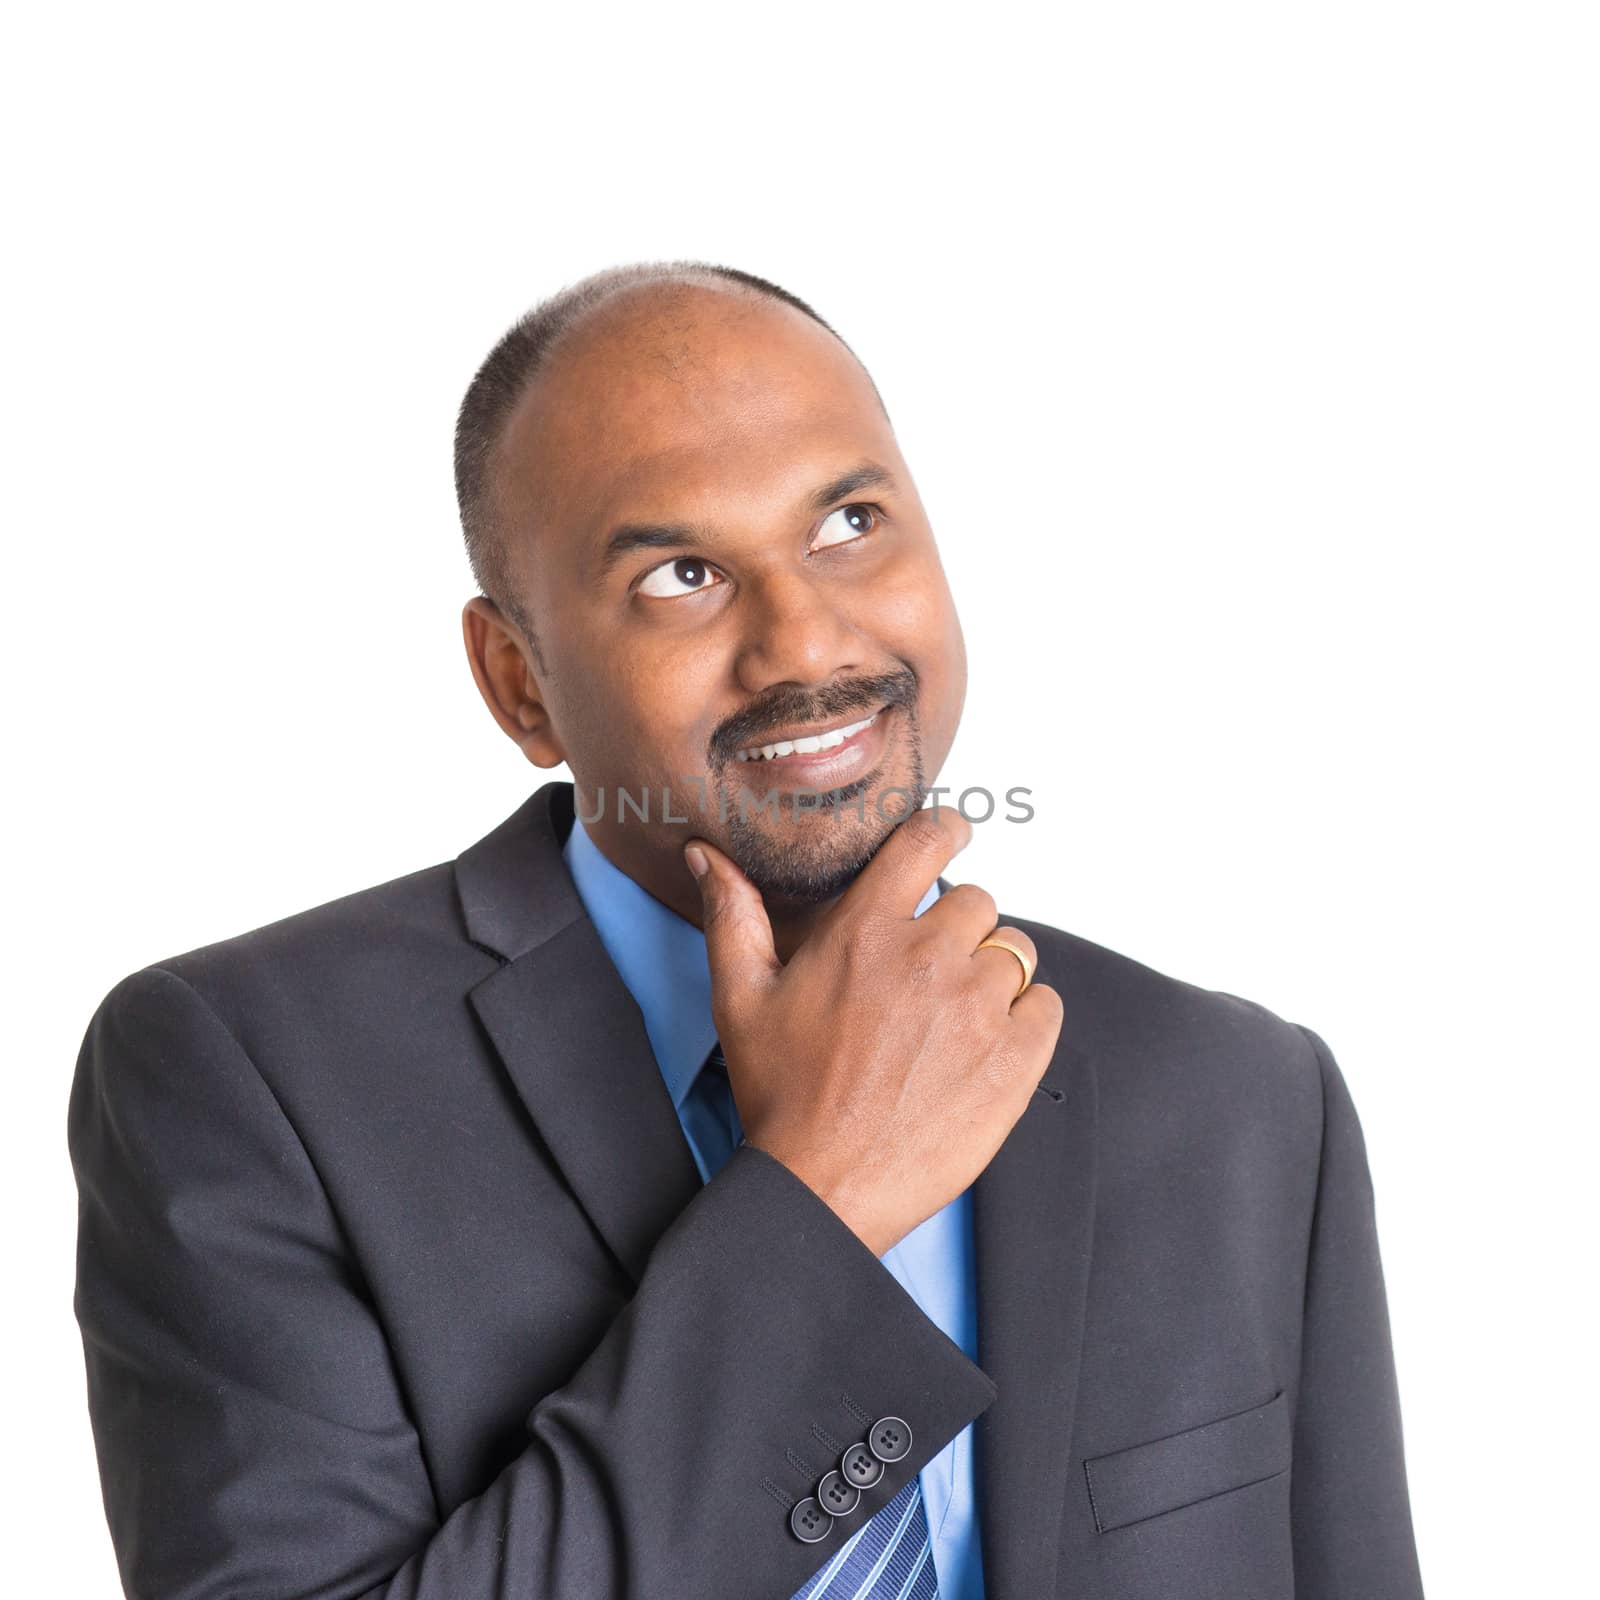 Portrait of mature Indian businessman looking up smiling and thinking, standing on plain background with shadow.